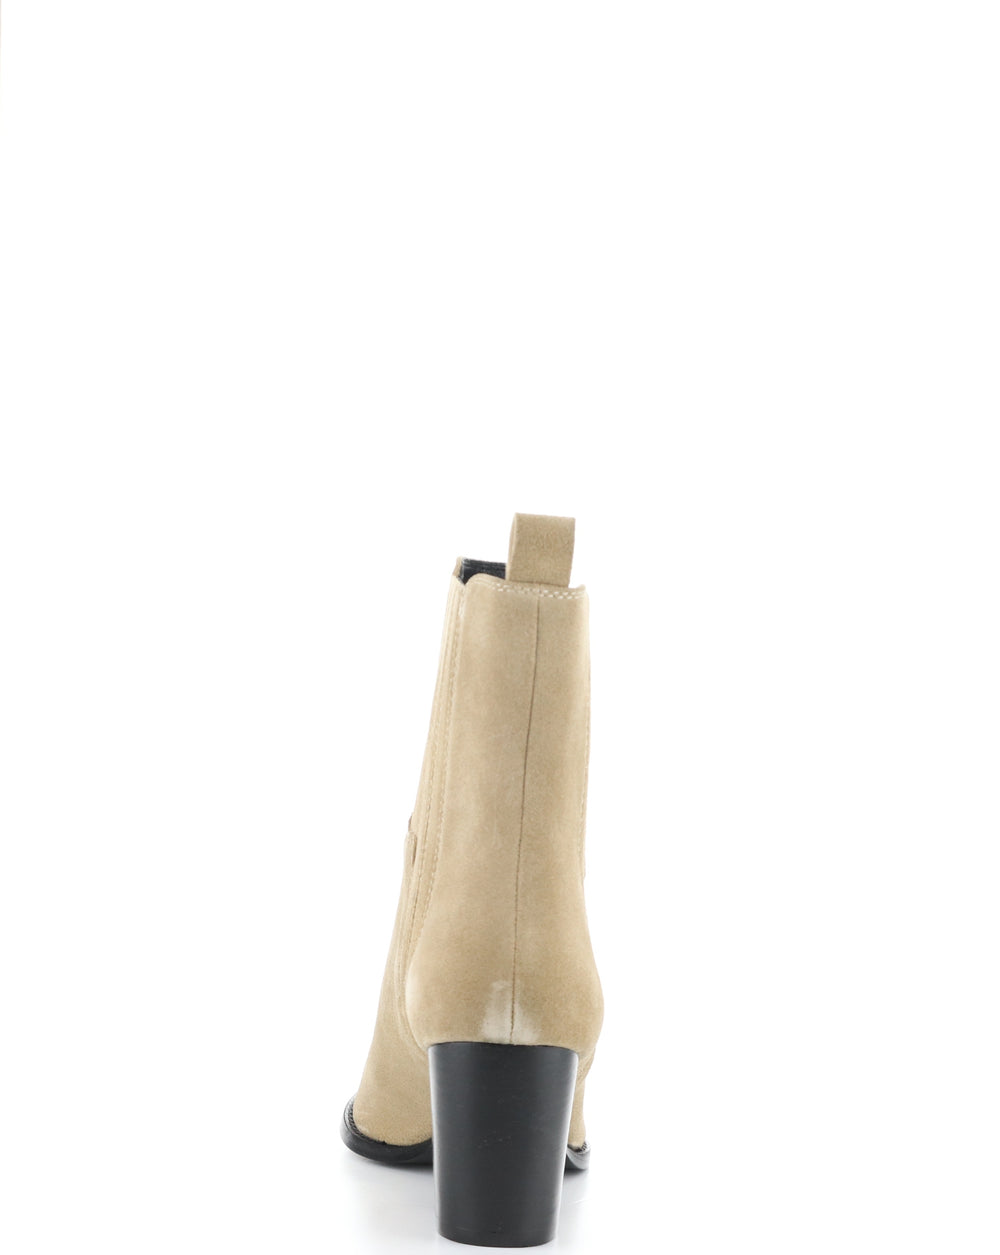 TRULY BEIGE Pointed Toe Boots